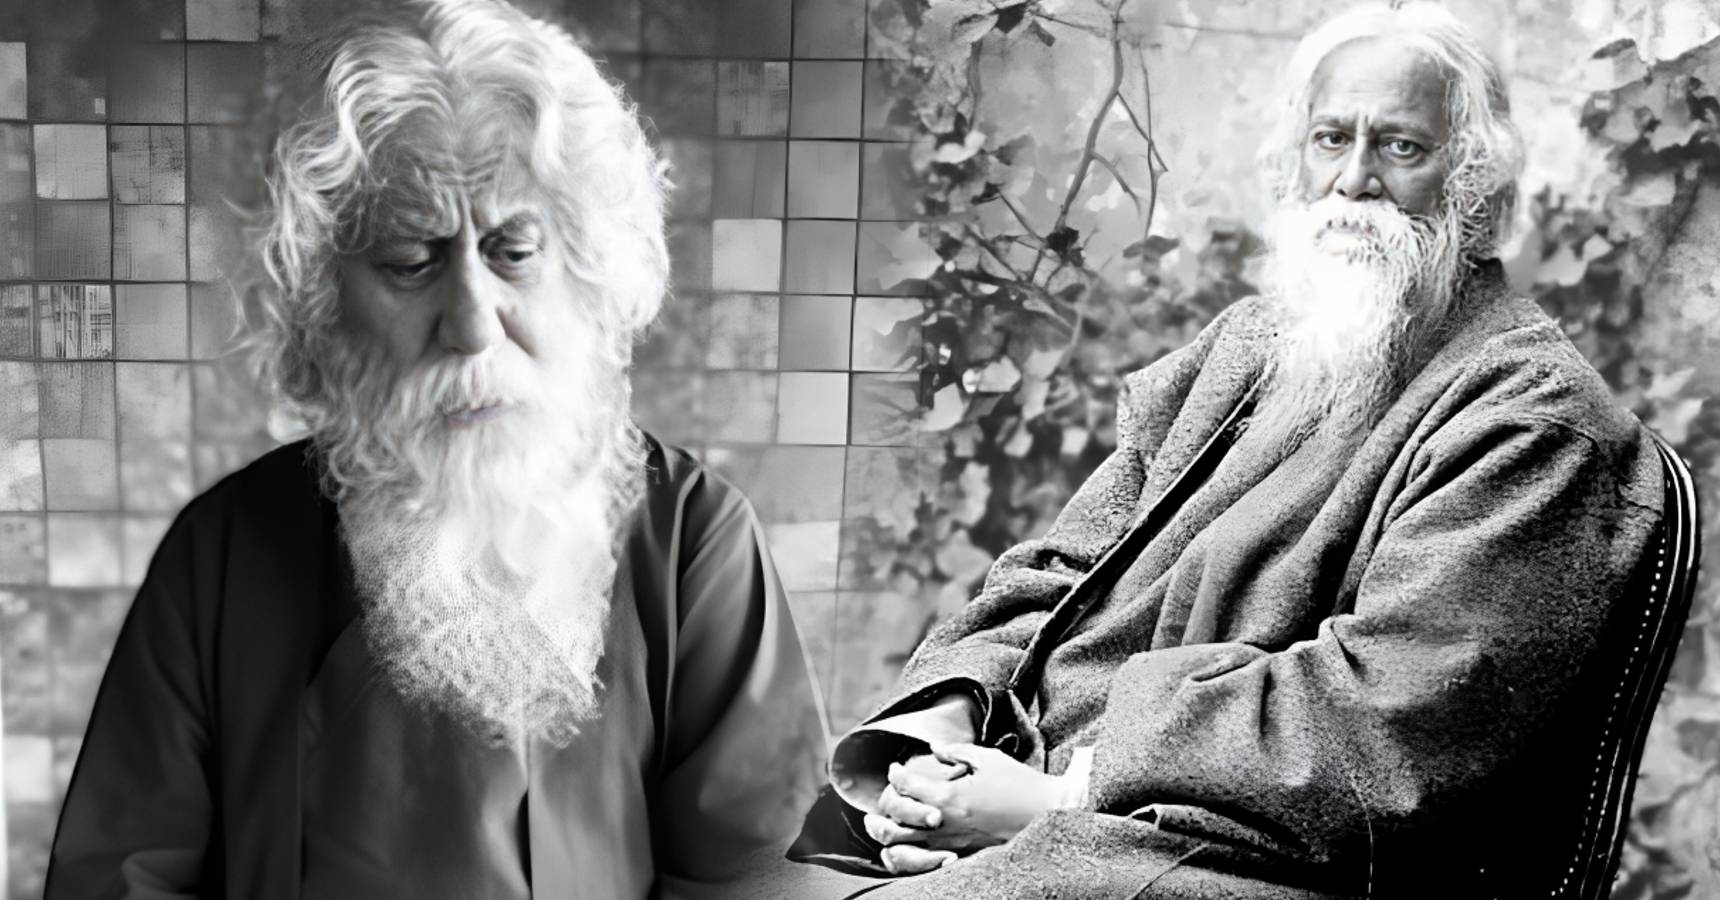 Bollywood actor Anupam Kher to portray Rabindranath Tagore in his next film